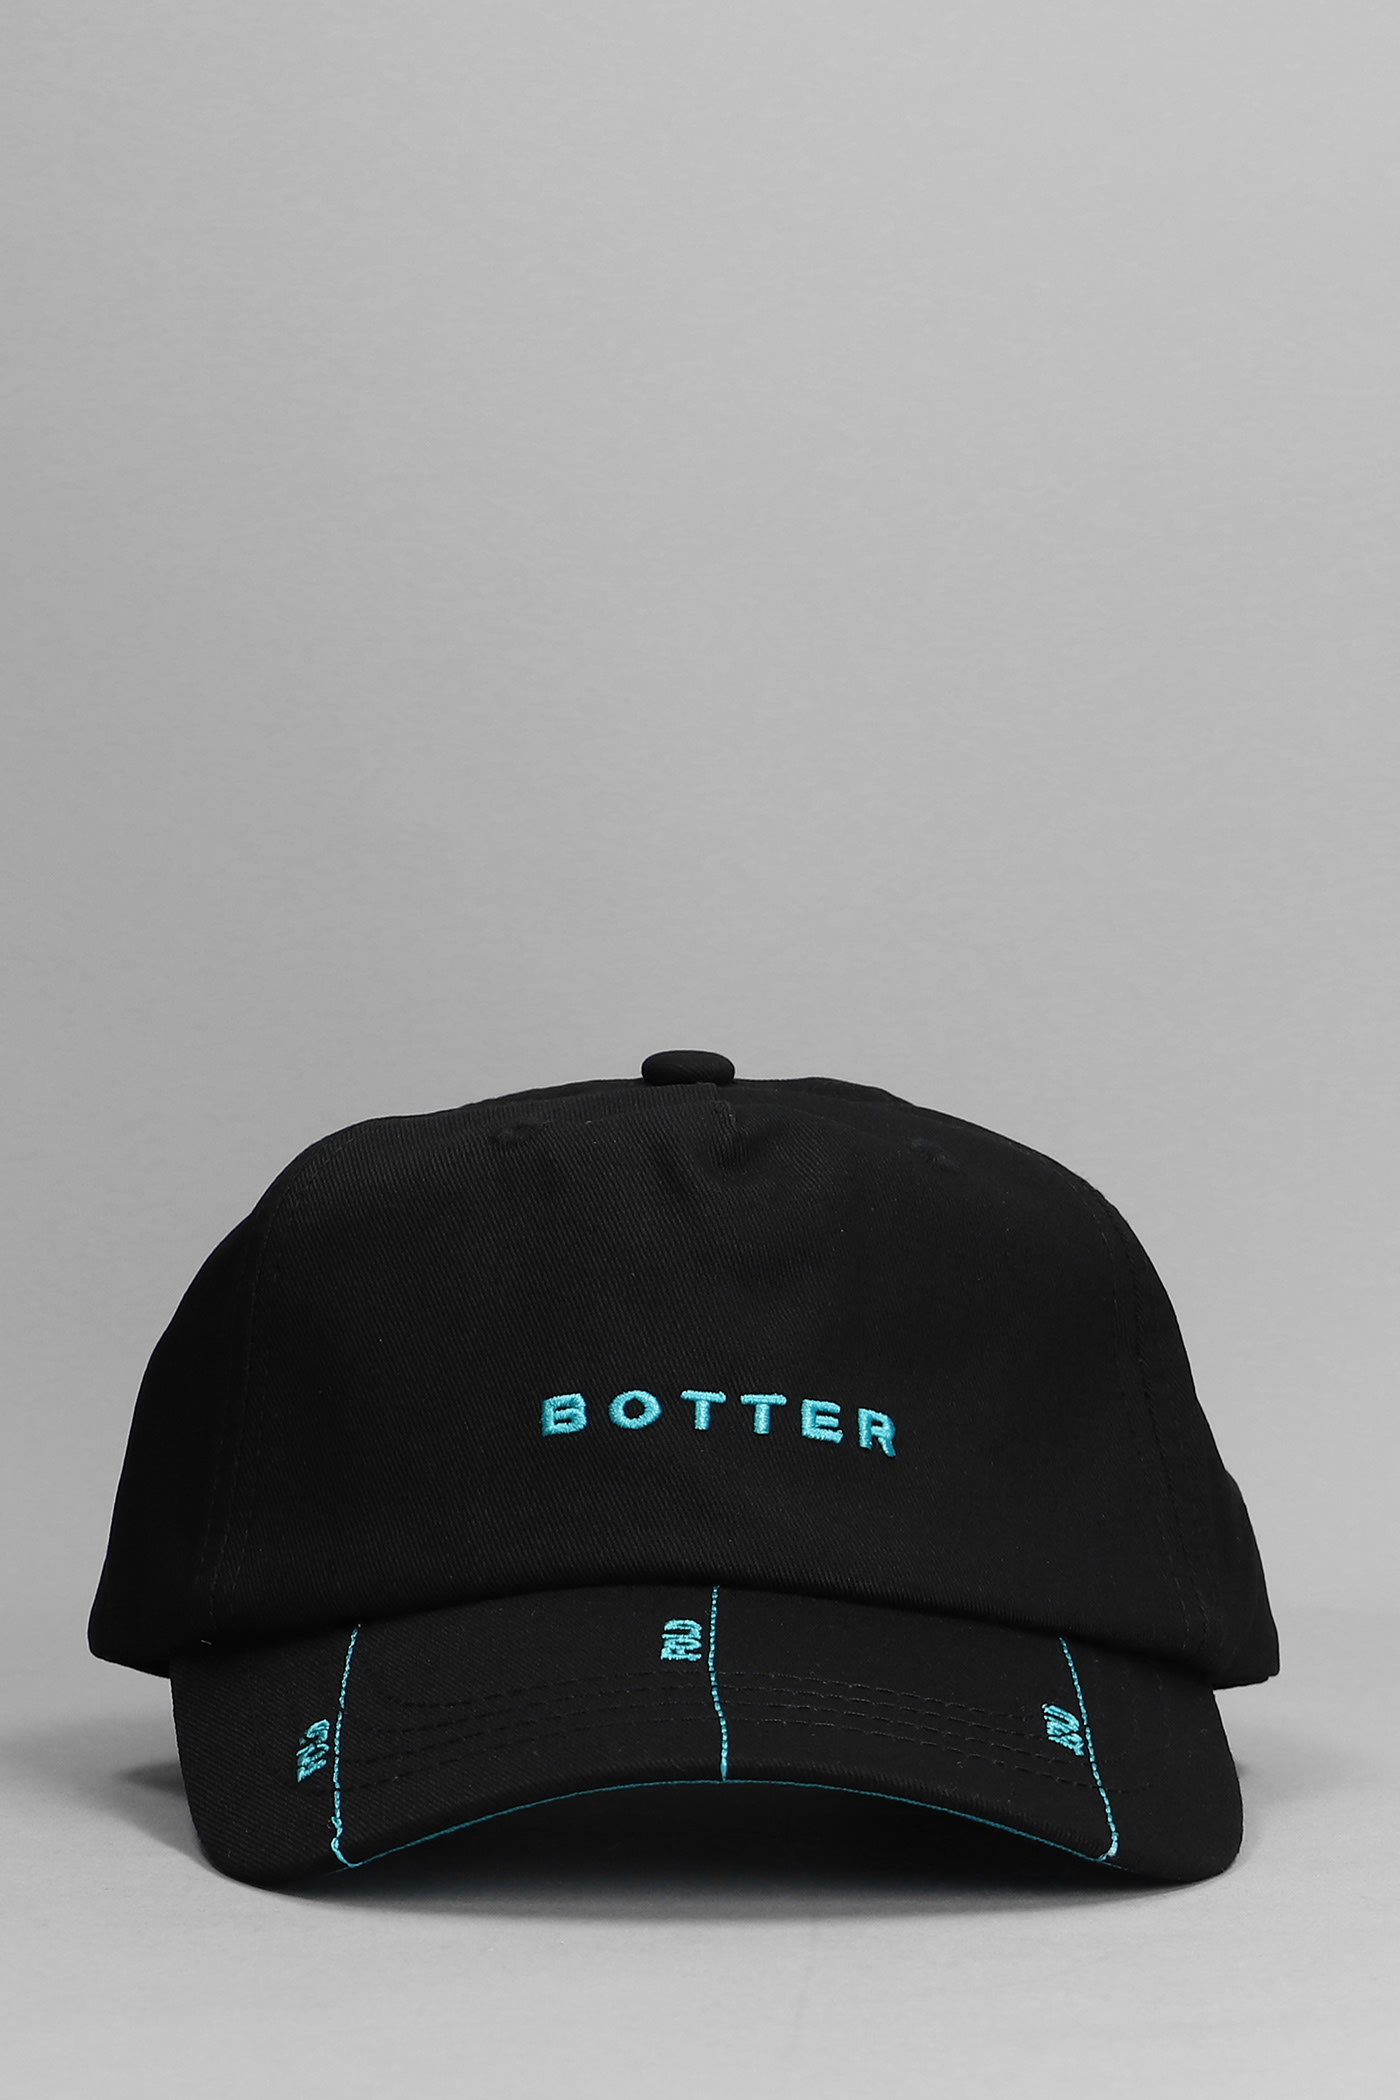 Botter Hats In Black Cotton